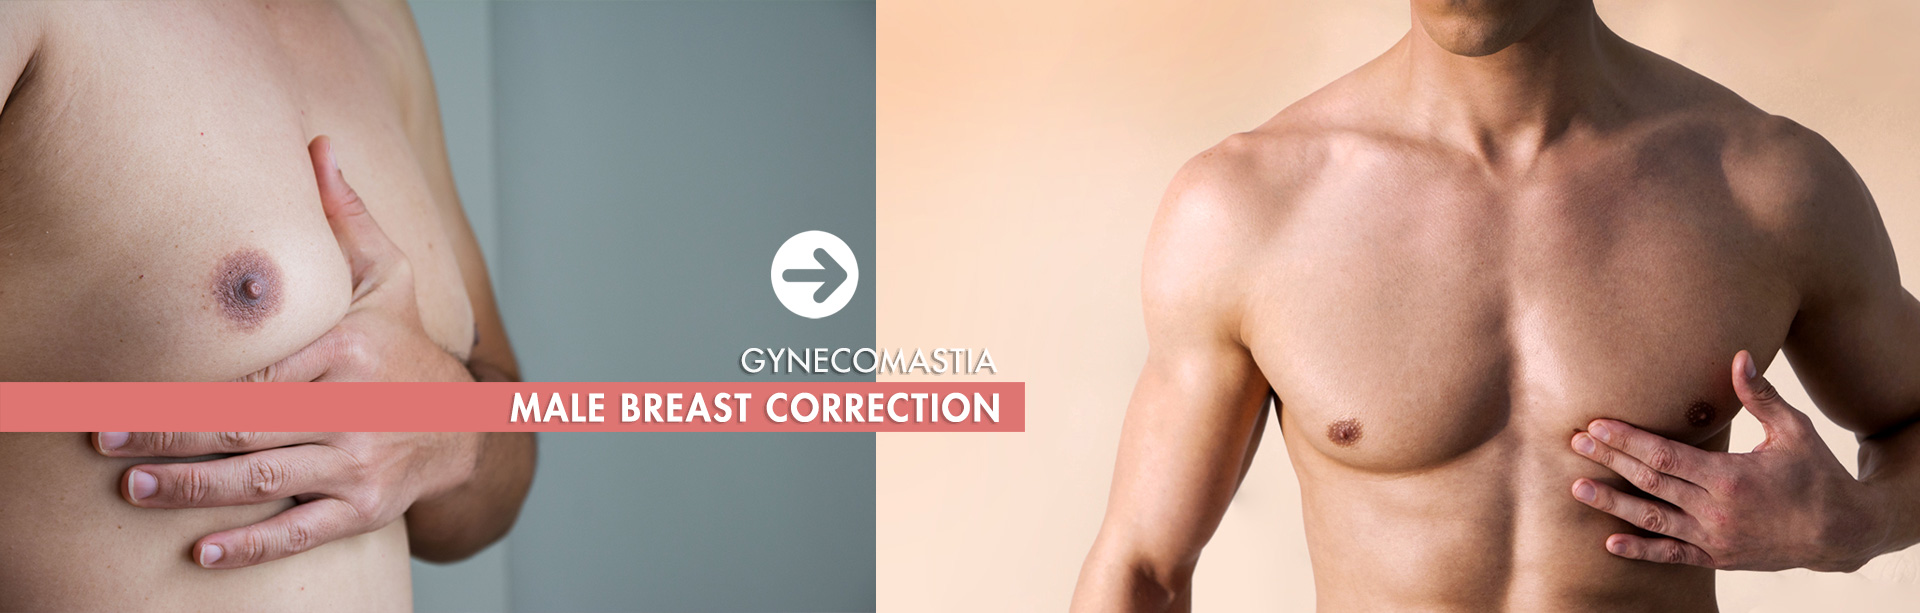 Male Breast Correction Hyderabad